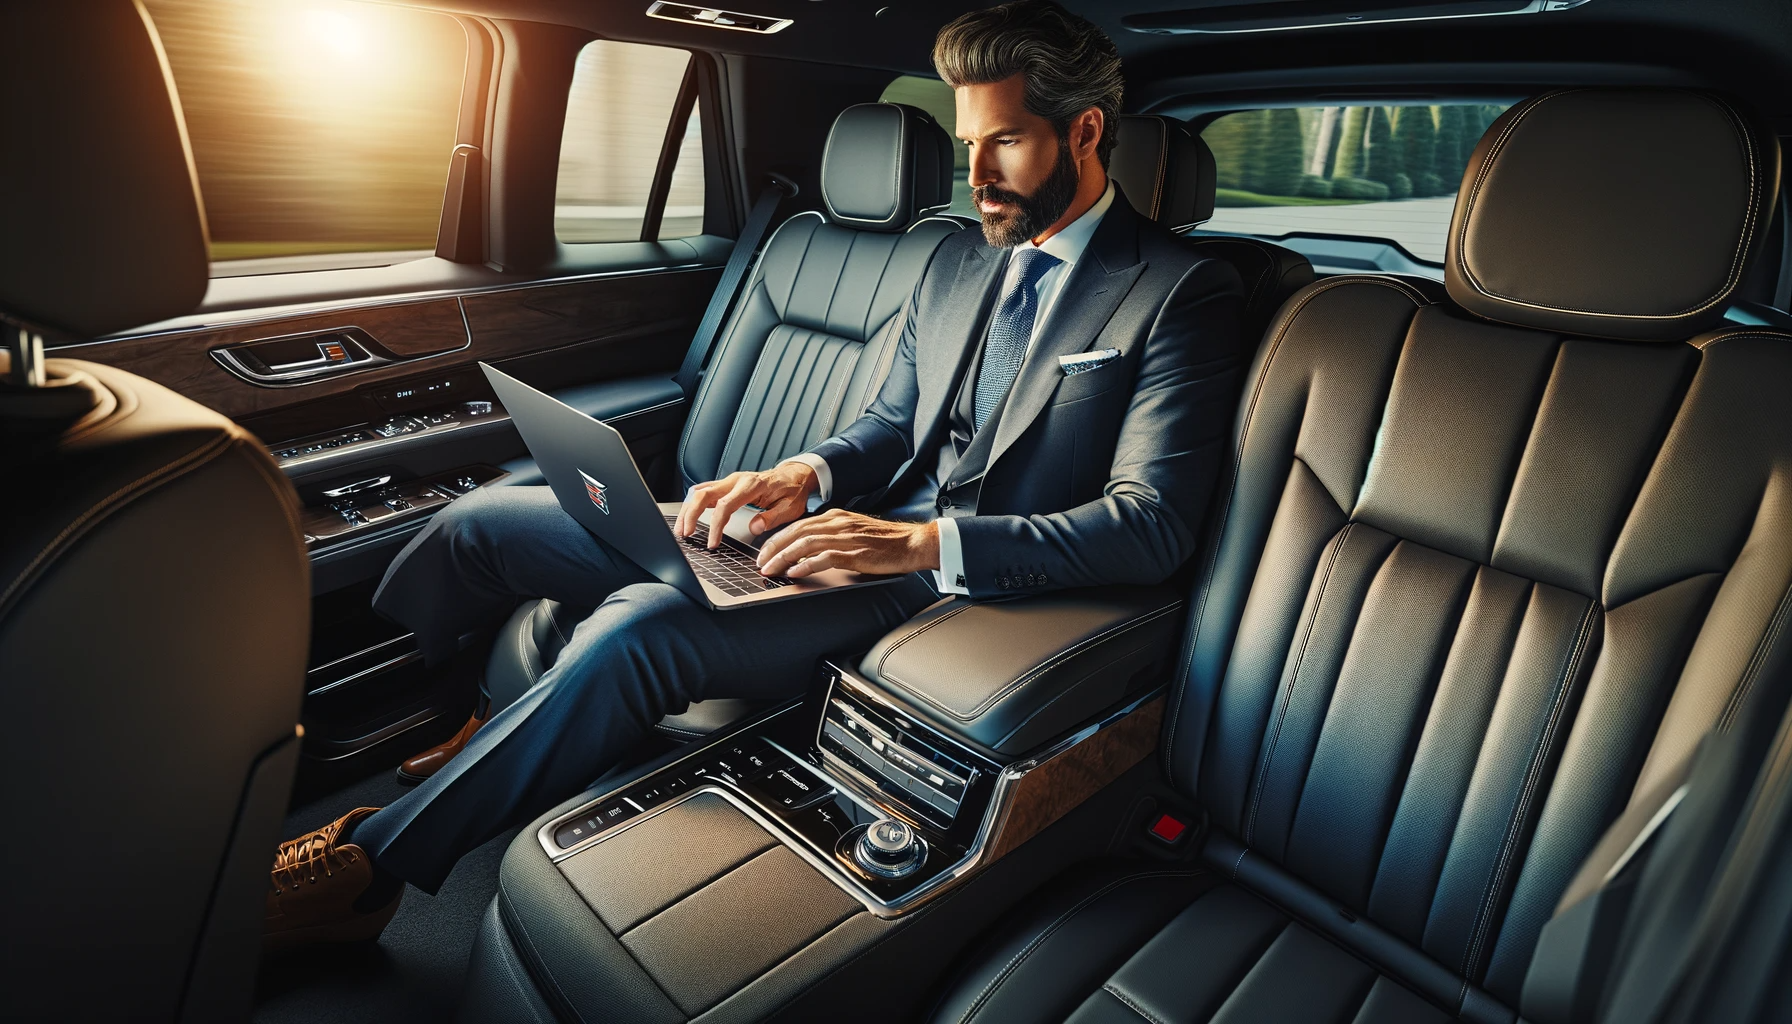 Business professional in a suit is working on a laptop inside the backseat of  Rockford Rides Limo